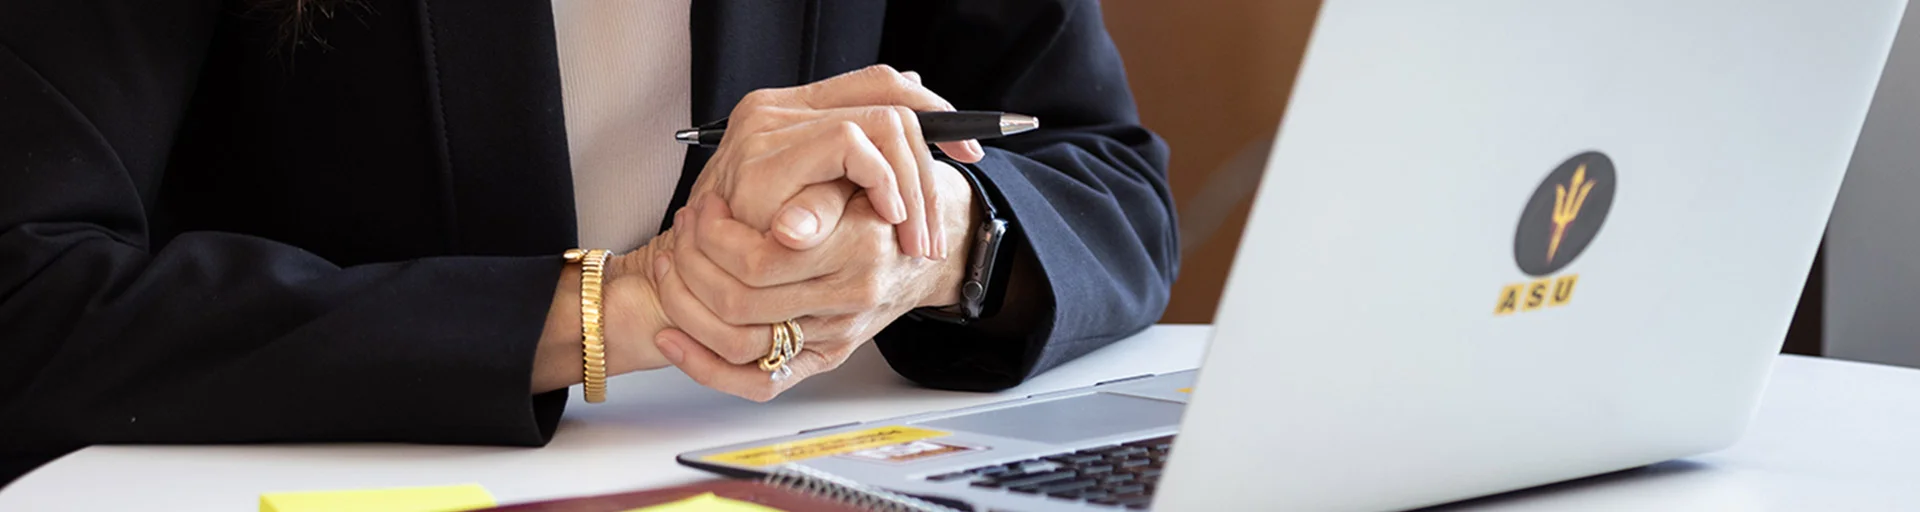 Image of hands holding a pen, papers and laptop on the table. 